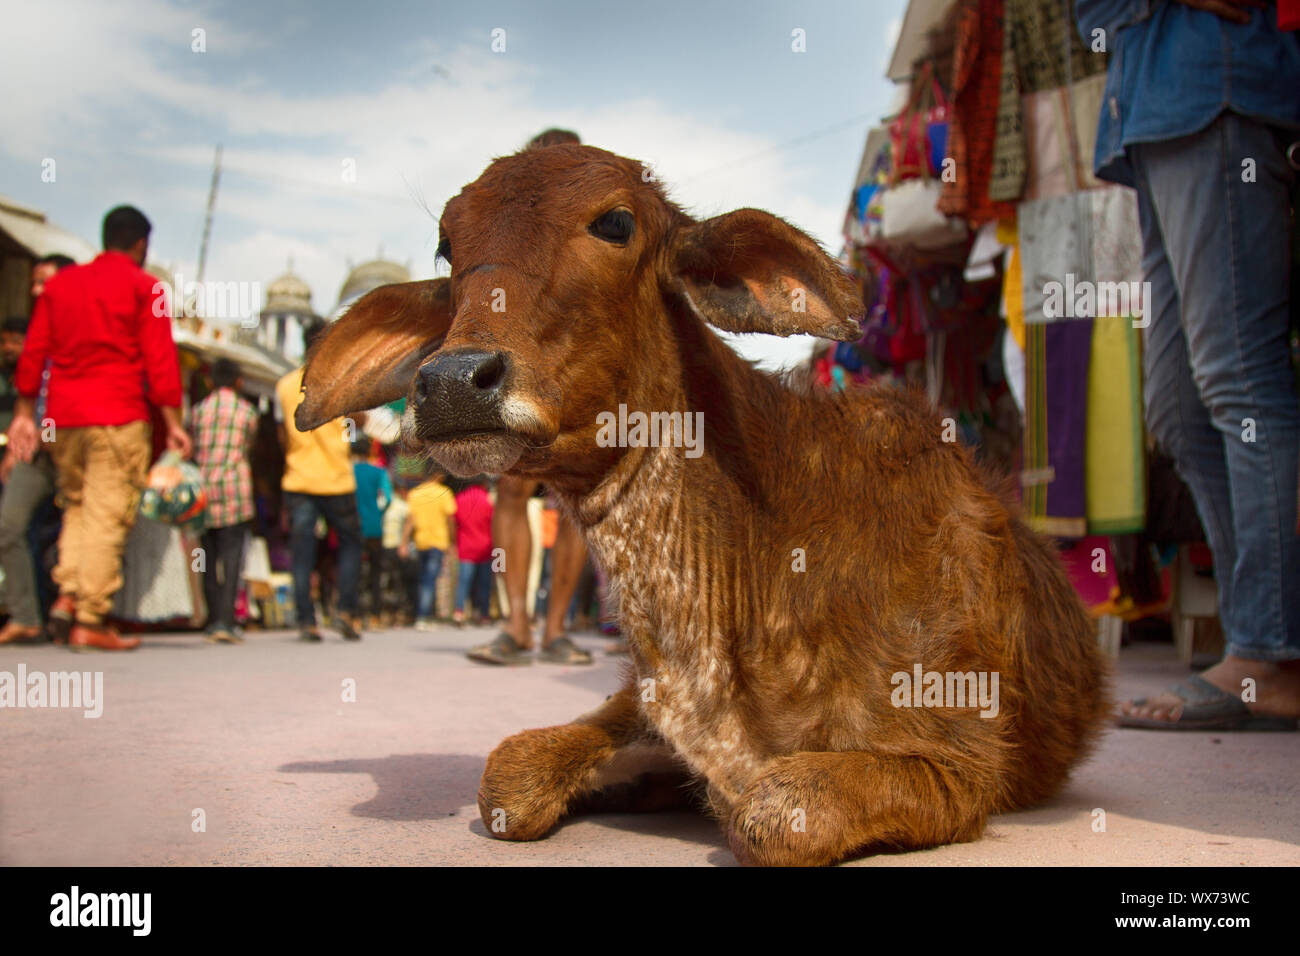 Sacred cows on the streets of Indian cities Stock Photo